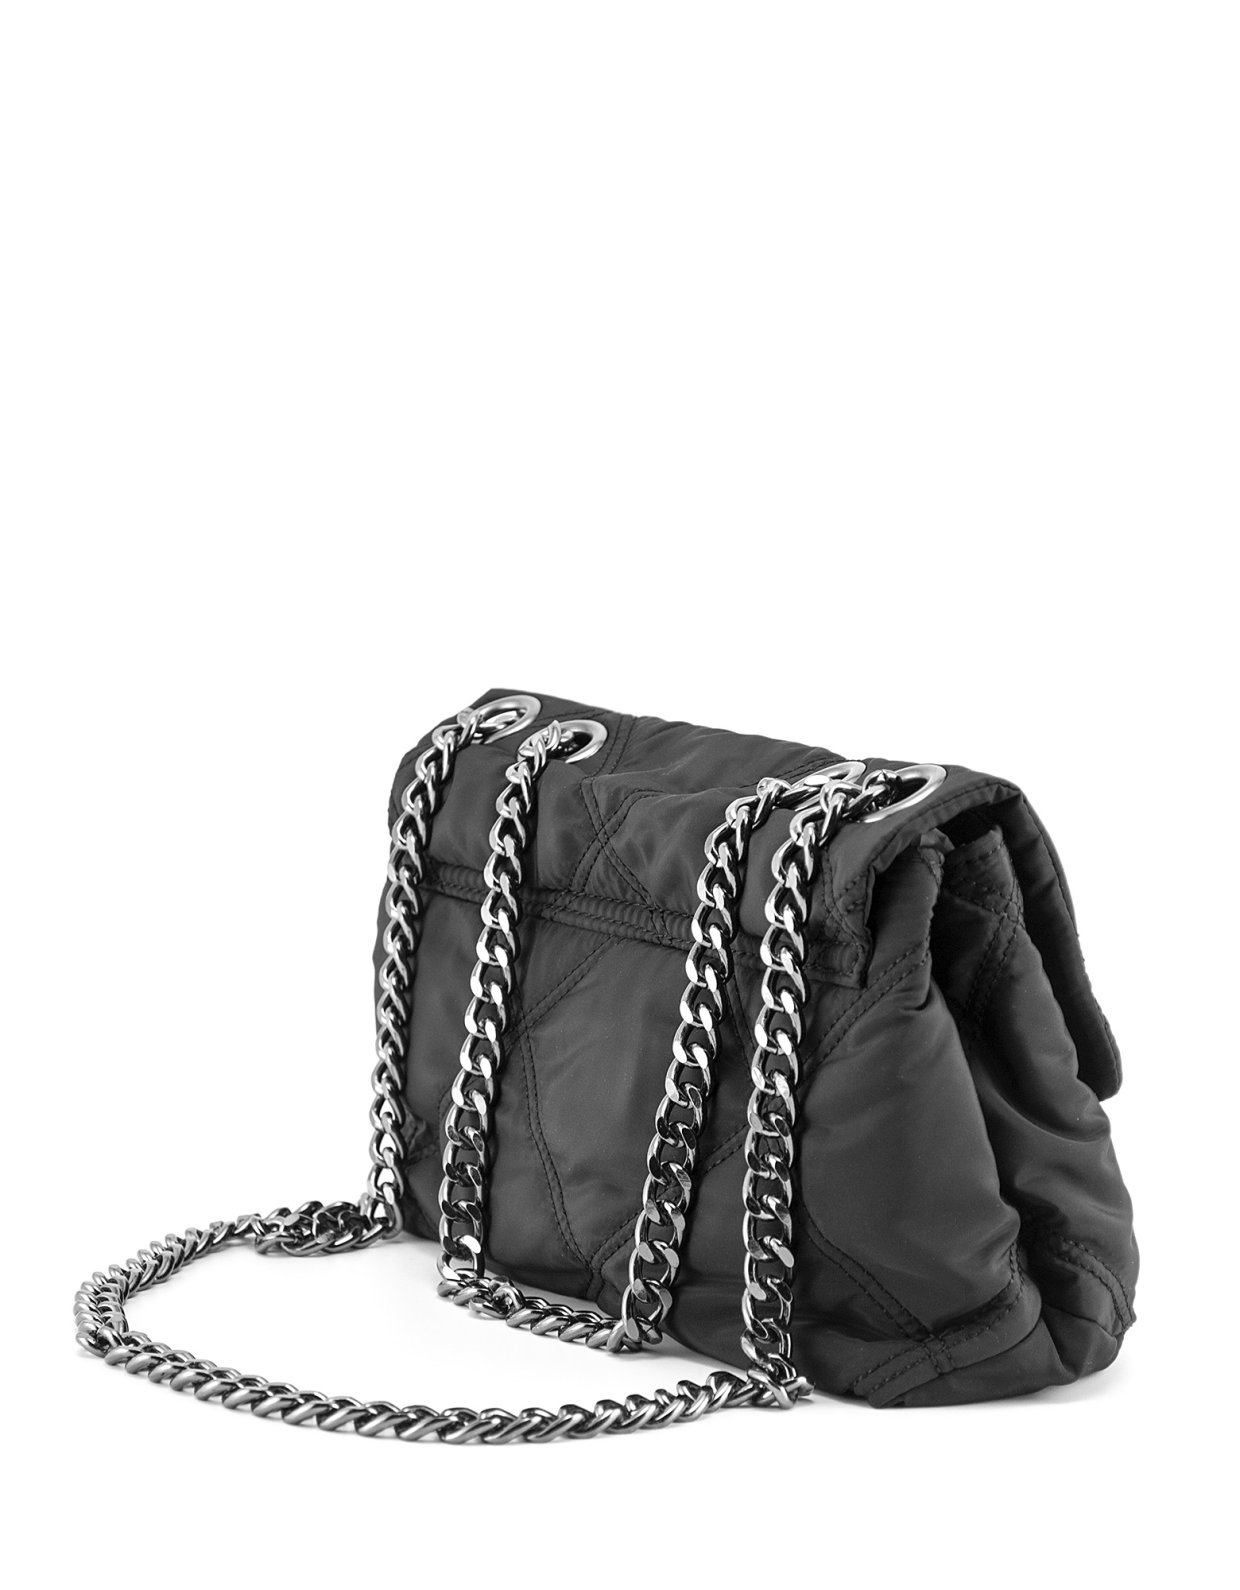 Kendall + Kylie Alexis quilted nylon bag black